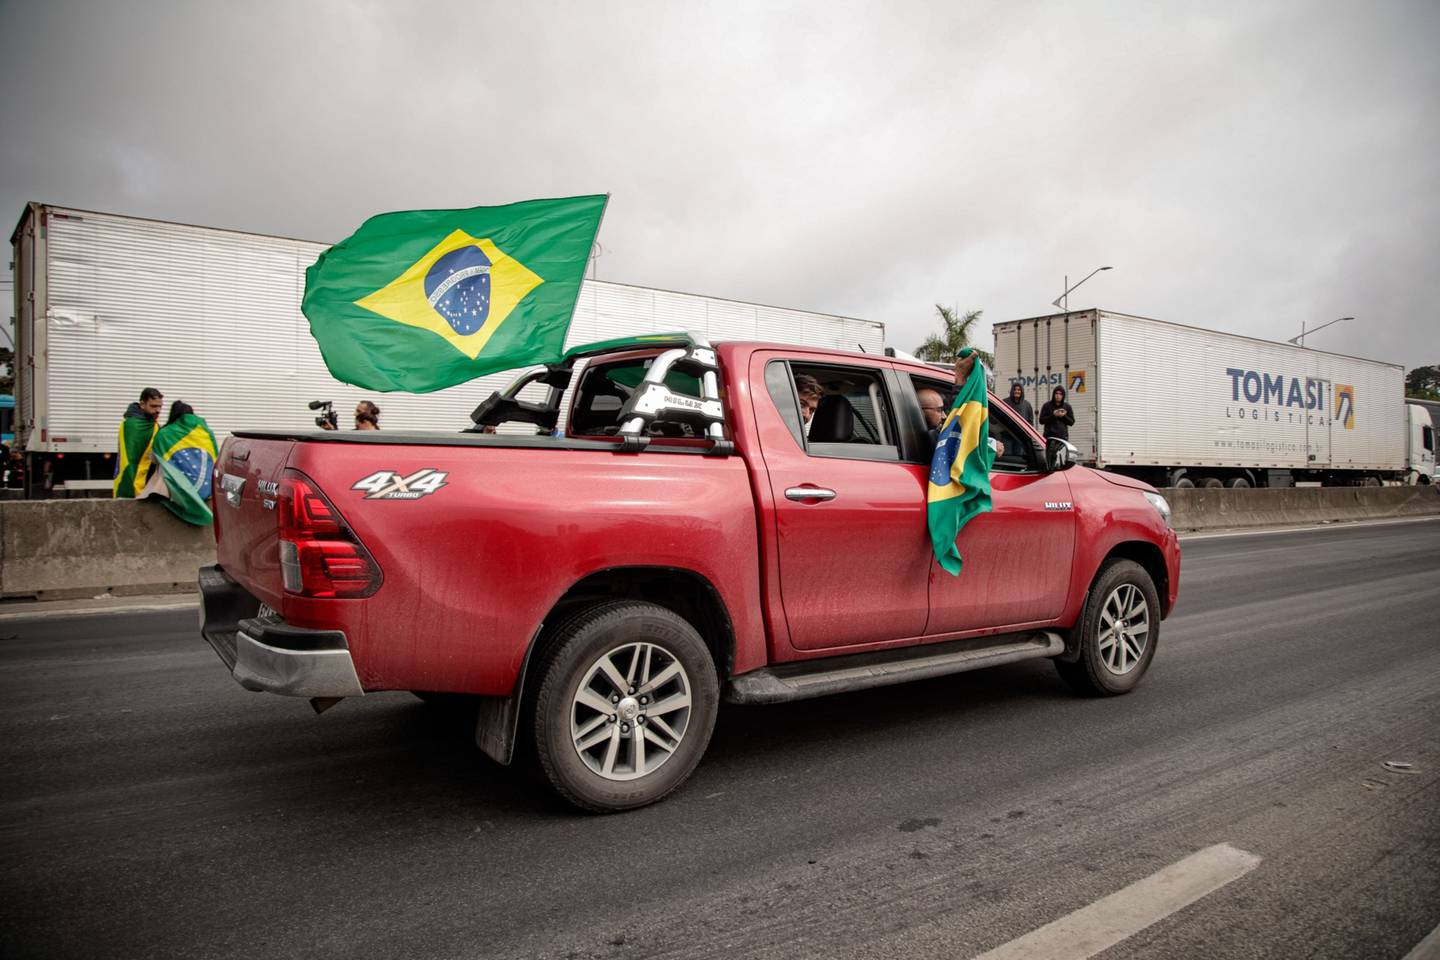 The protests against the result of Sunday’s presidential election, which Bolsonaro narrowly lost, were still partially or fully blocking 156 highways across 15 states on Wednesday morning.